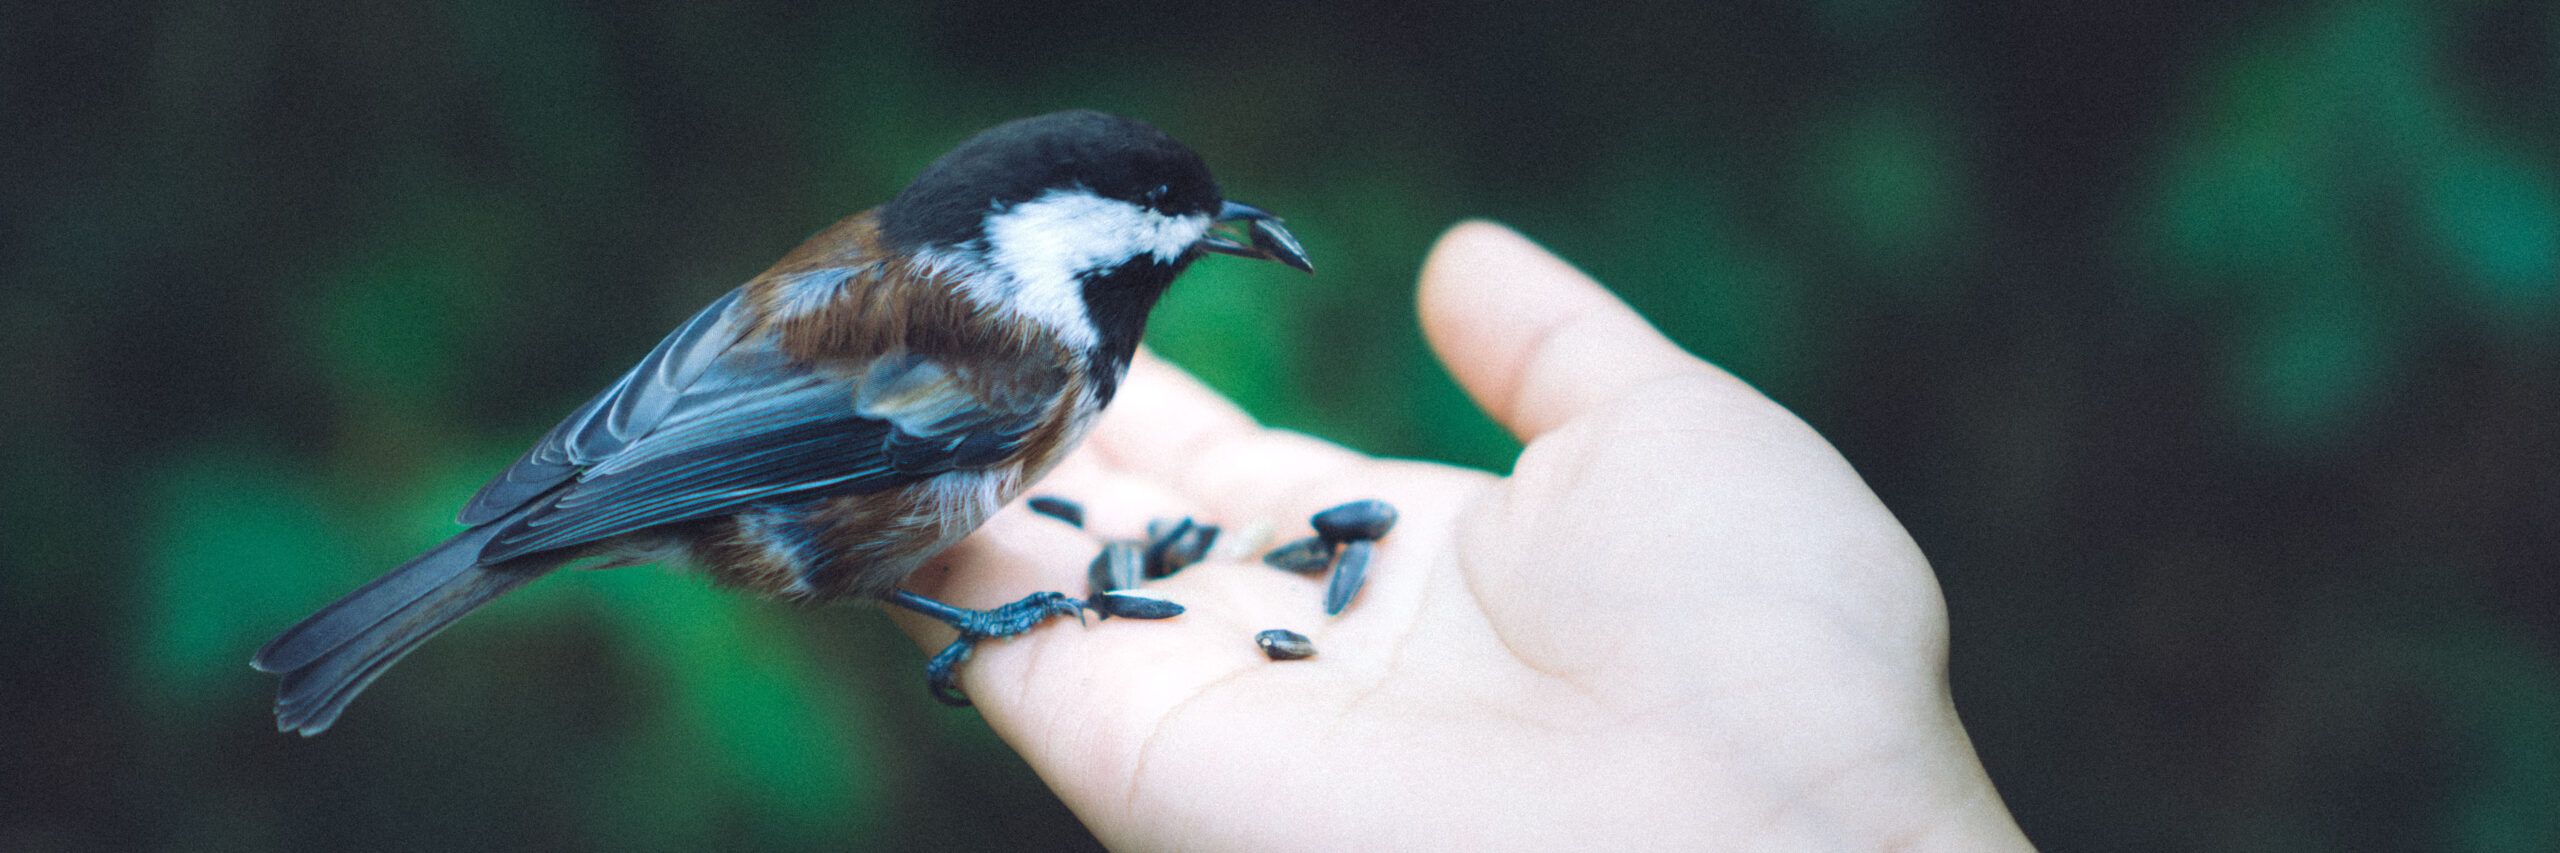 Bird perched on a human hand, eating seeds